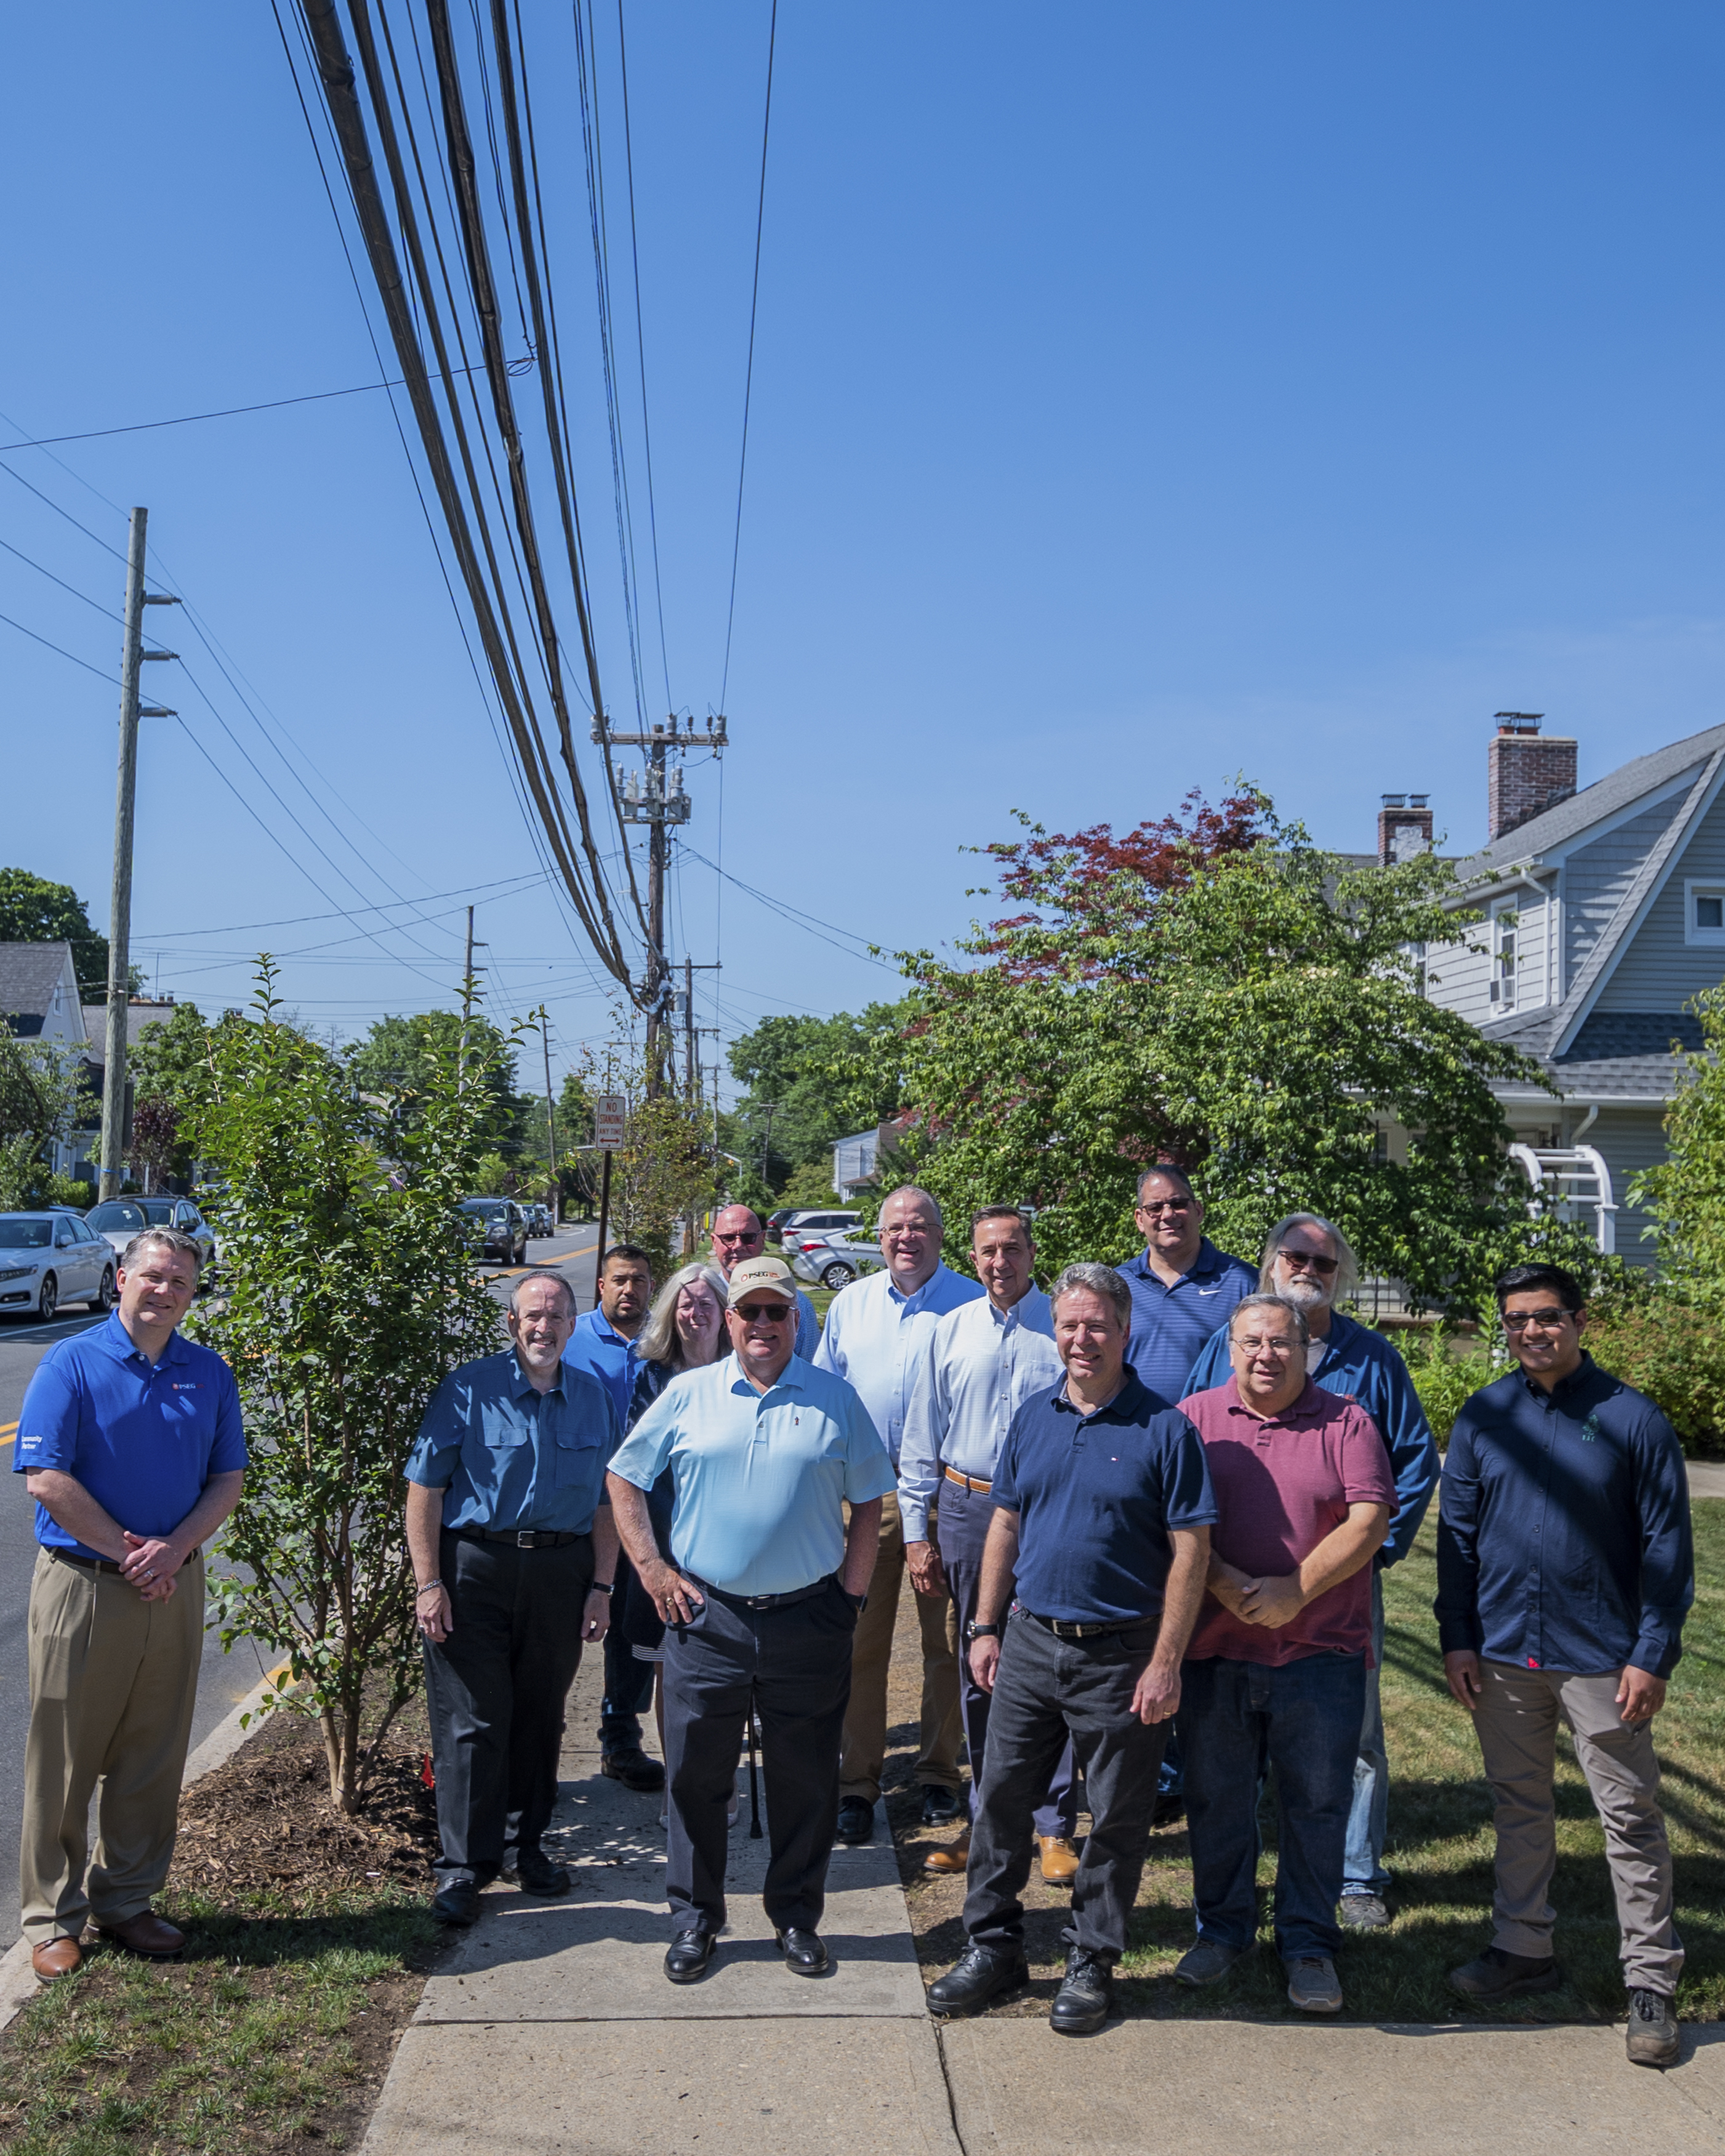 Floral Park officials, including Village Trustee Mike Longombardi (second from left), Deputy Mayor Lynn Pombonyo (fourth from left), Public Works Superintendent Kevin Ginnane (fifth from left), Mayor Kevin Fitzgerald (seventh from left) and Village Trustee Frank Chiara (eighth from left) joined PSEG Long Island personnel on June 30 to celebrate the planting of ornamental, wire-friendly trees on Plainfield Avenue. The trees replace taller pin oaks that posed hazards to the power lines during severe weather.